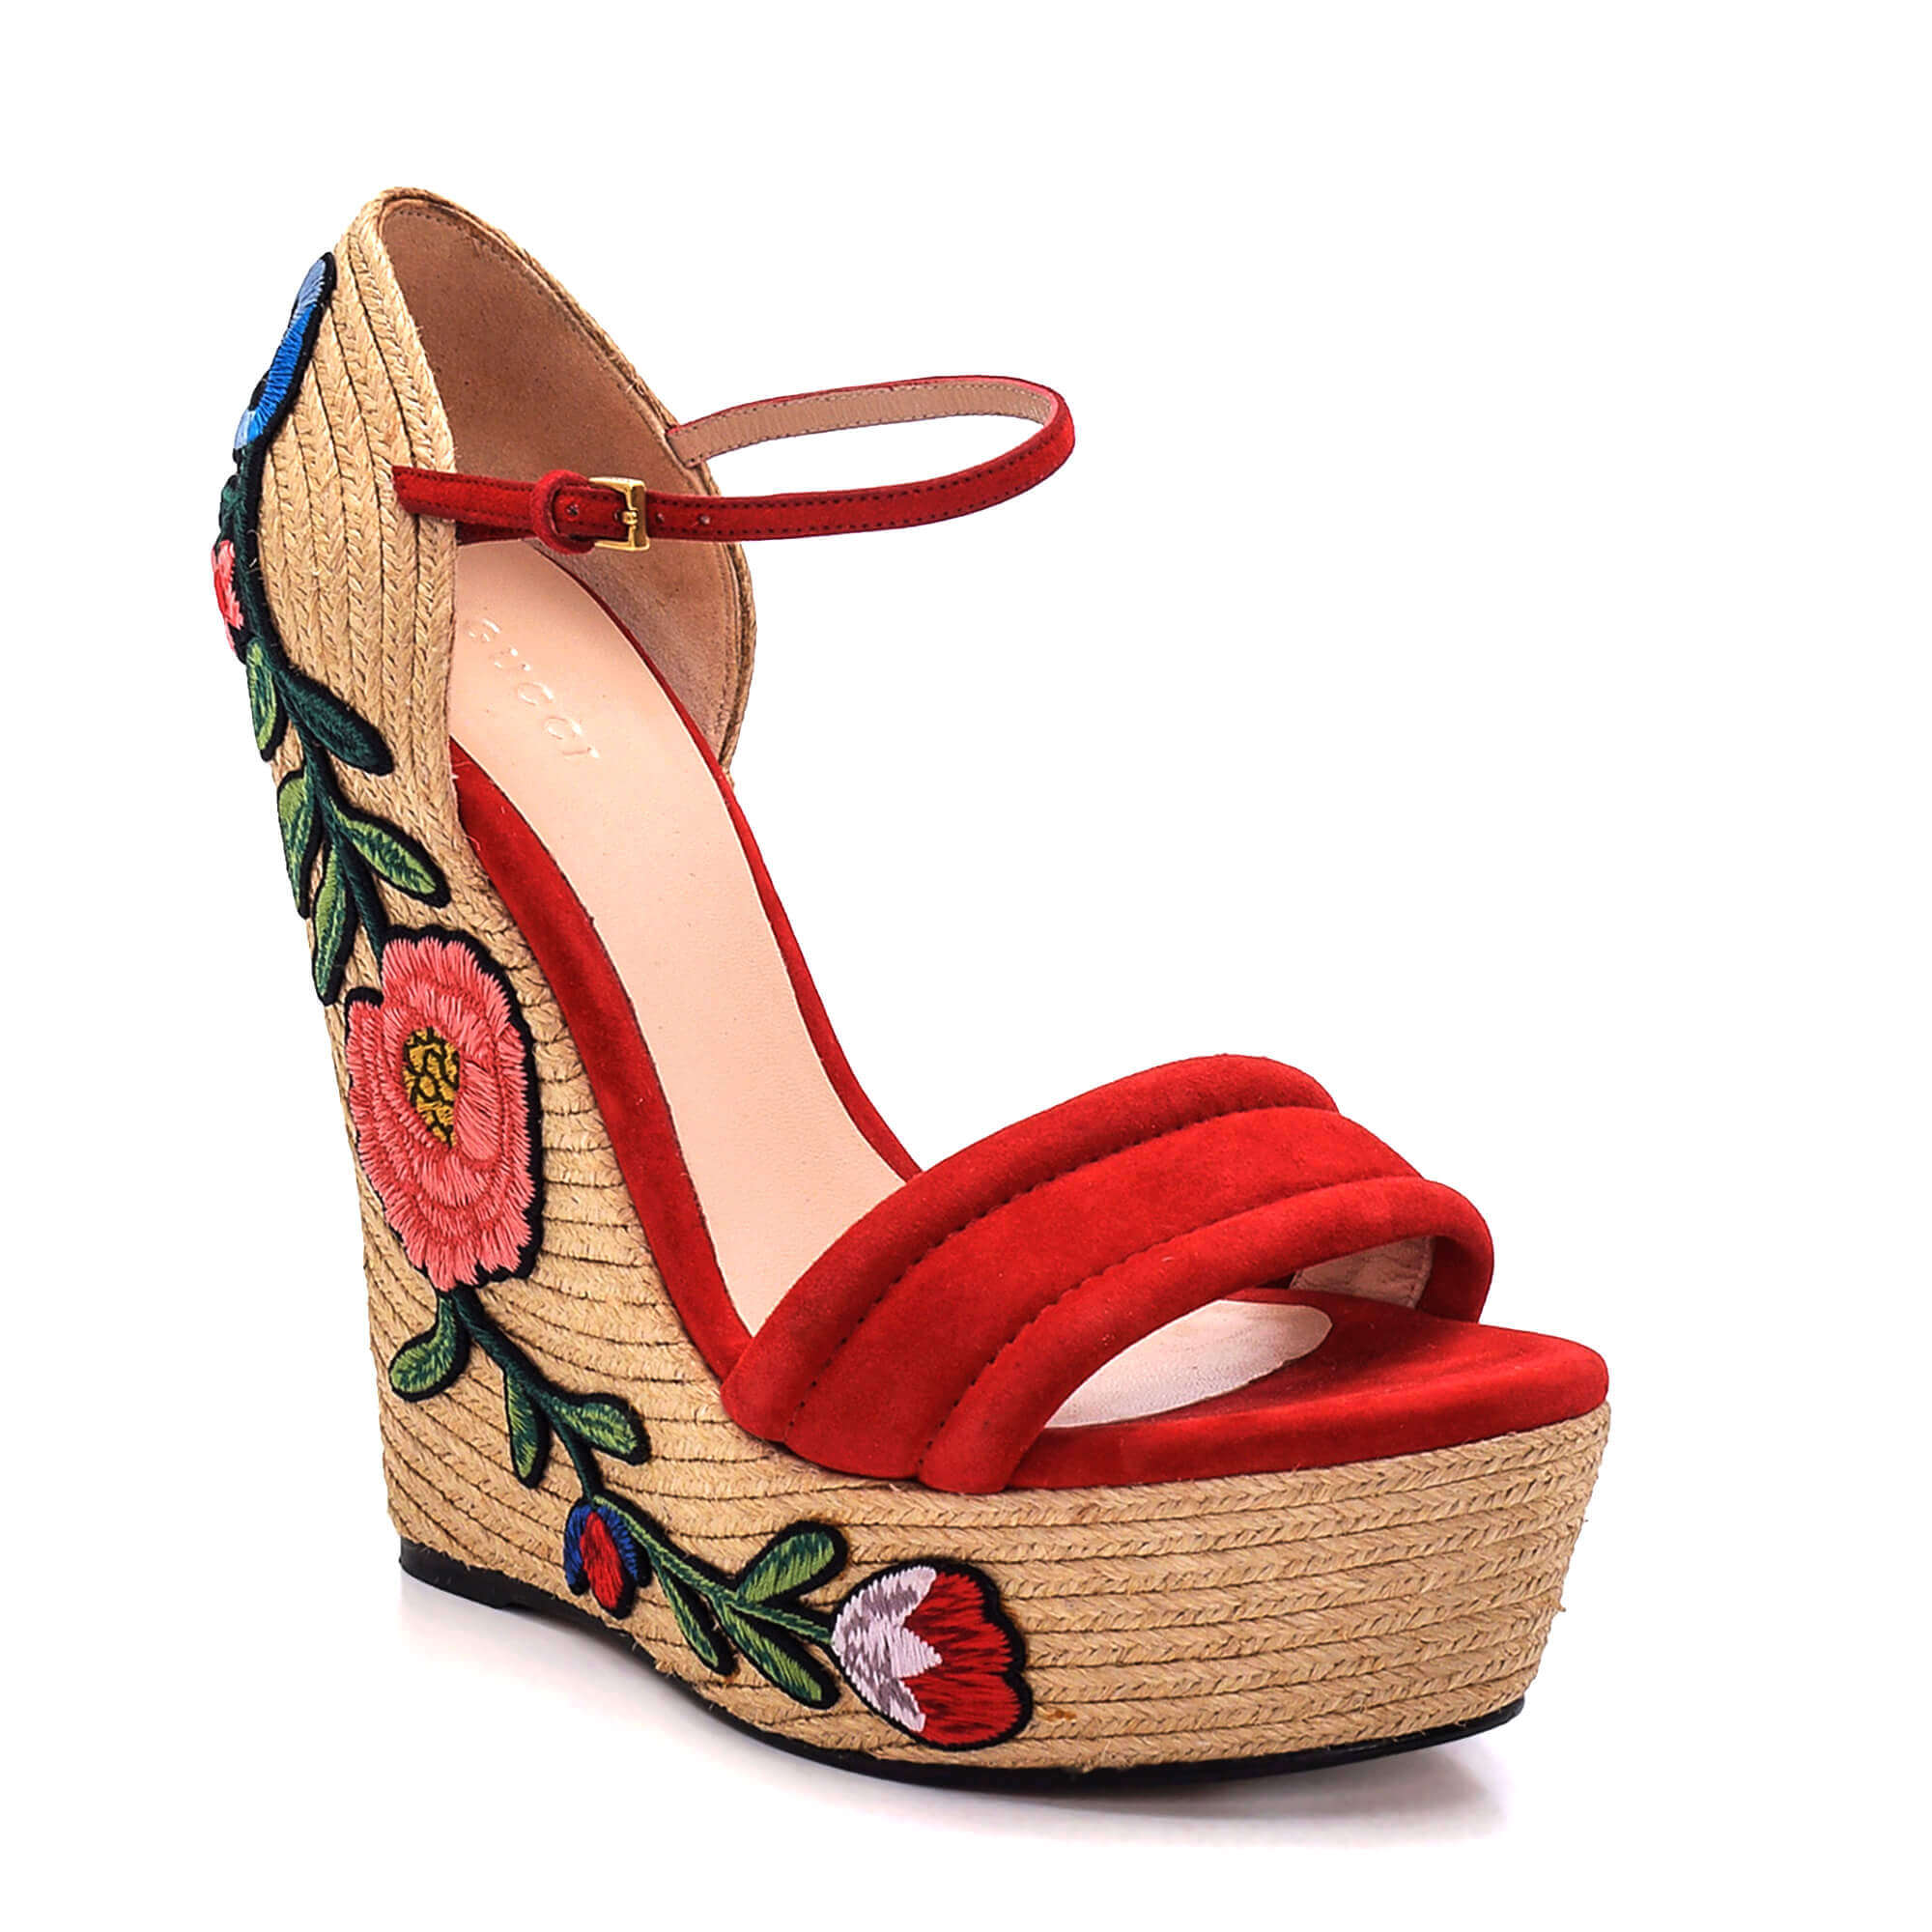 Gucci - Red Suede Floral Embroidered Ankle Strap Espadrille Wedge Sandals